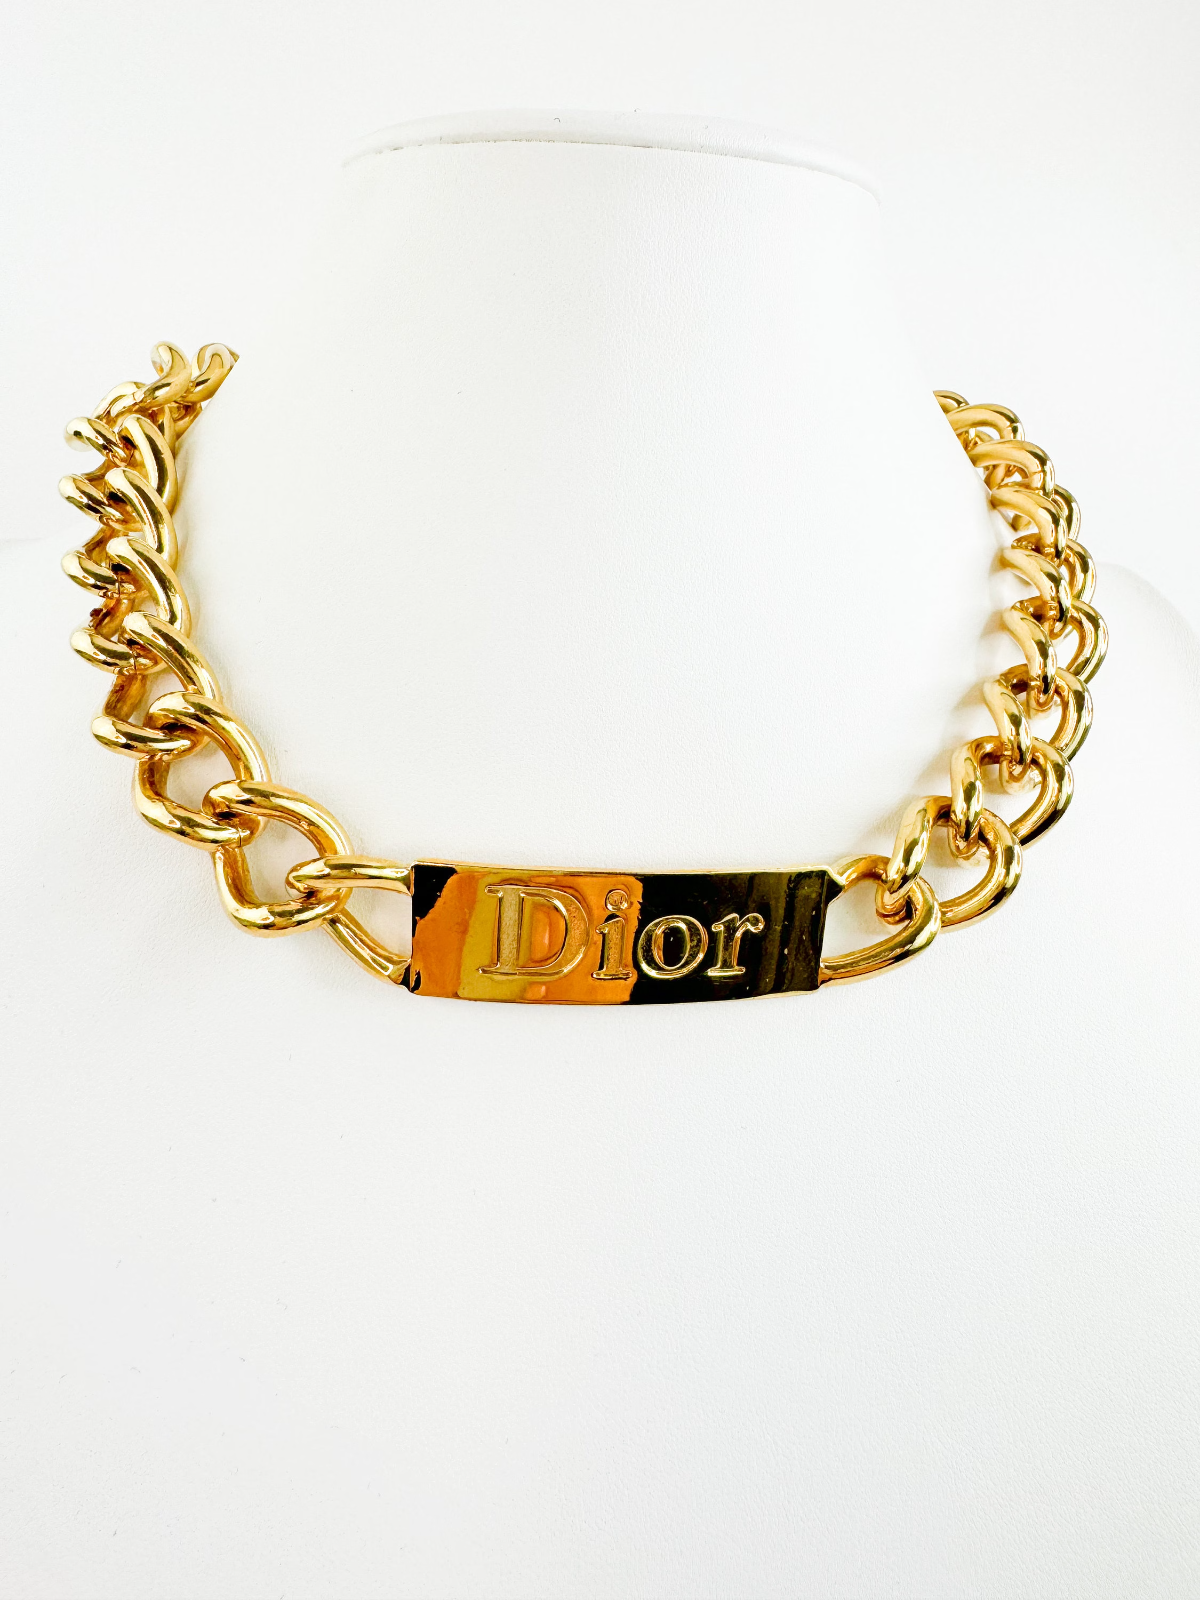 Vintage Christian Dior  ID choker Necklace, Dior Chain Necklace, Gold Tone Necklace John Galliano Dior chunky Curb necklace , Gift for her